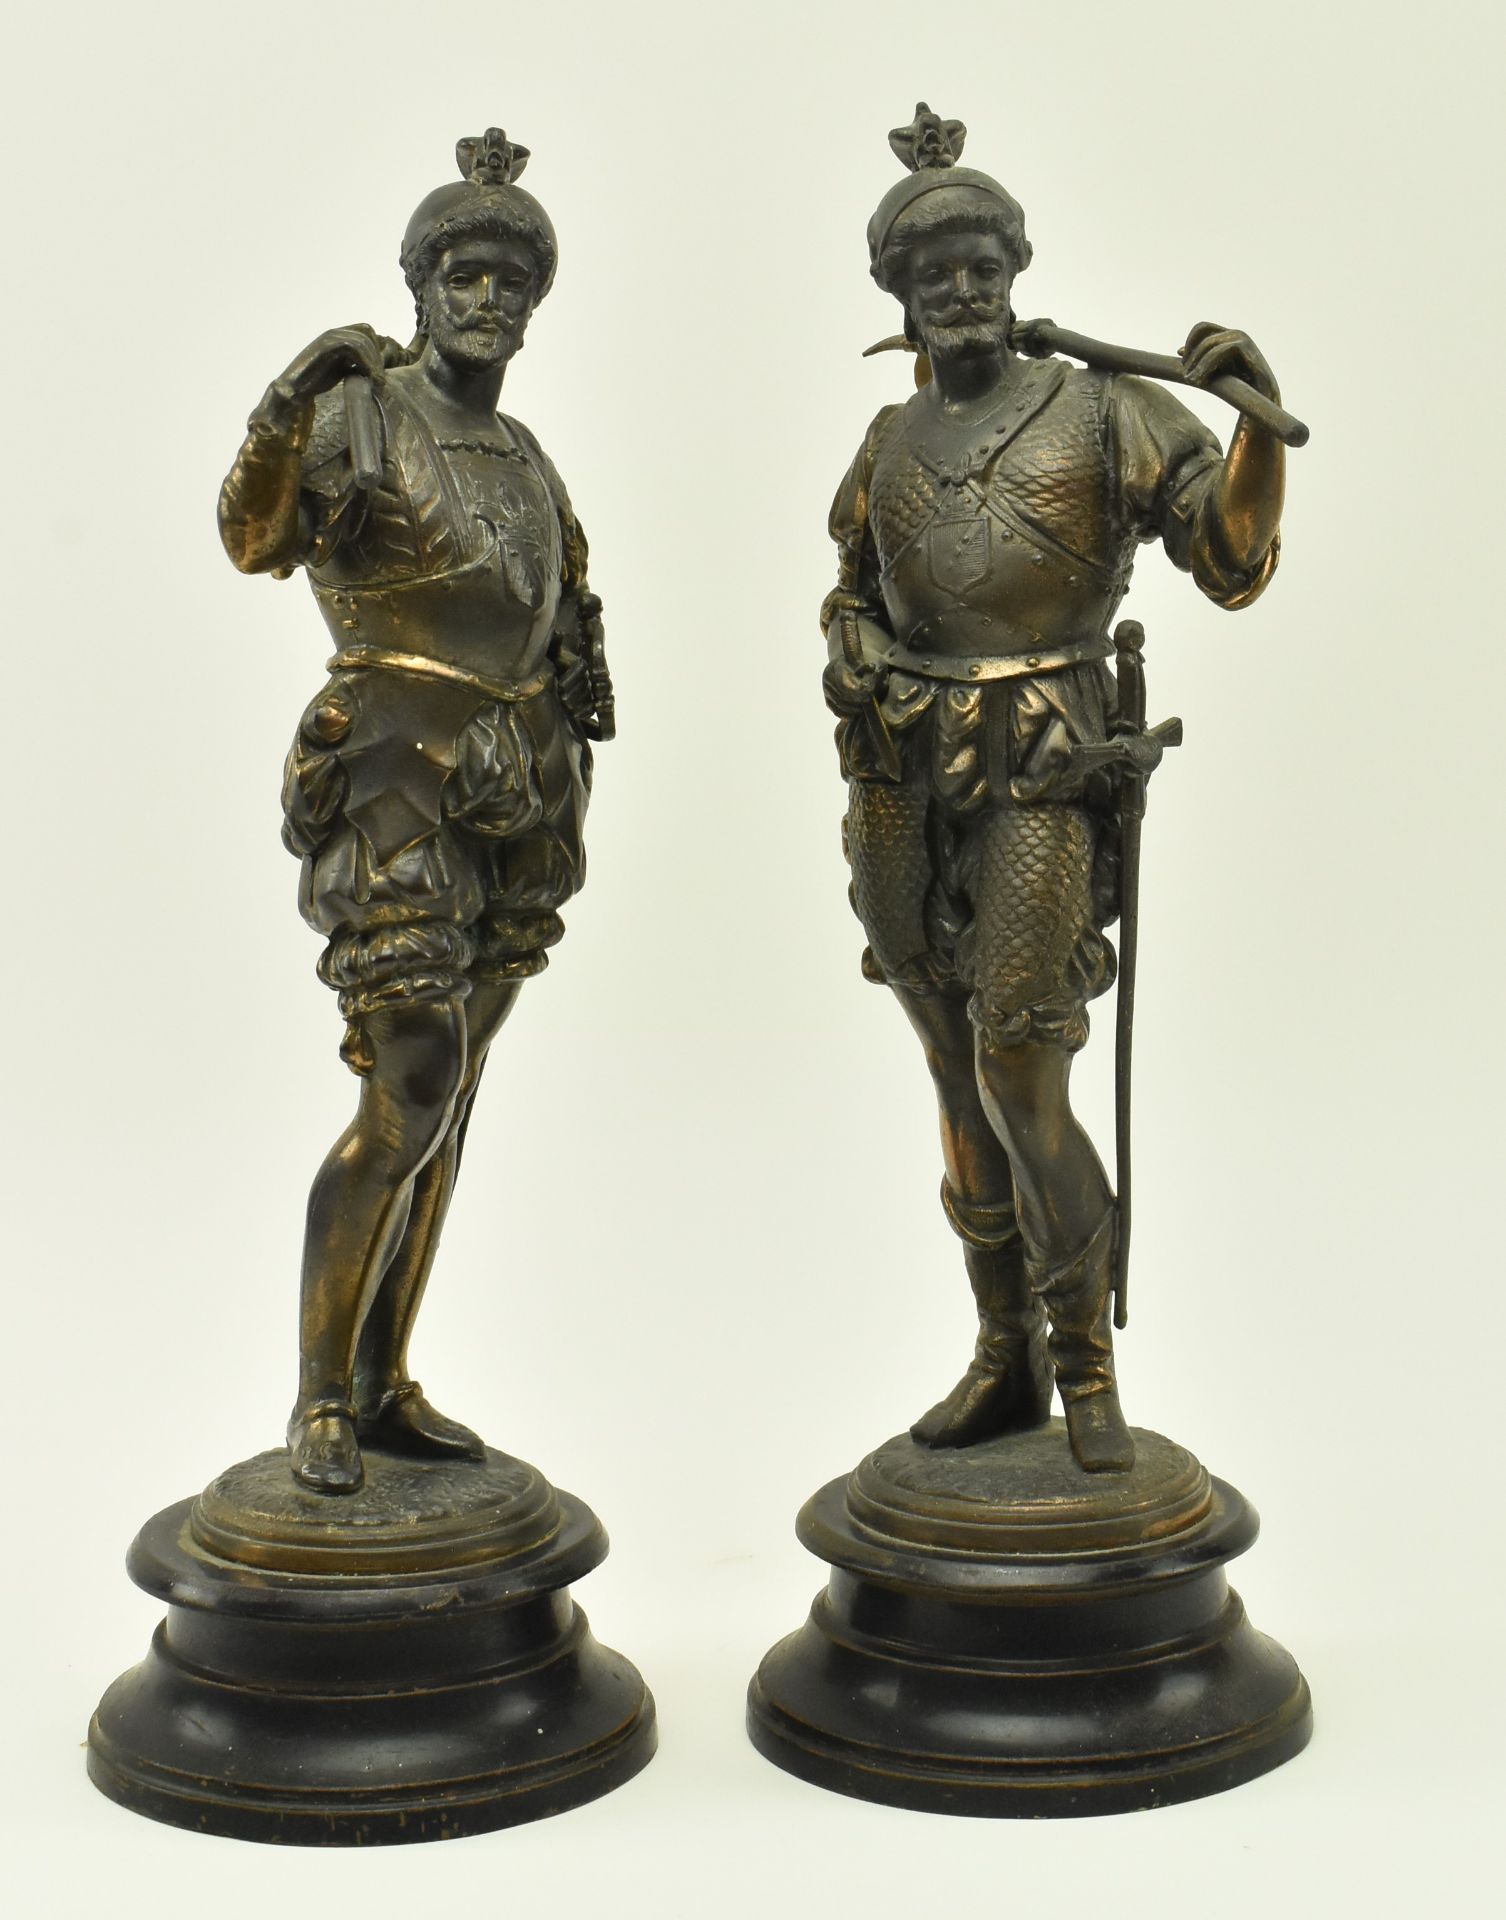 PAIR OF EARLY 20TH CENTURY RENAISSANCE STYLE FIGURINES